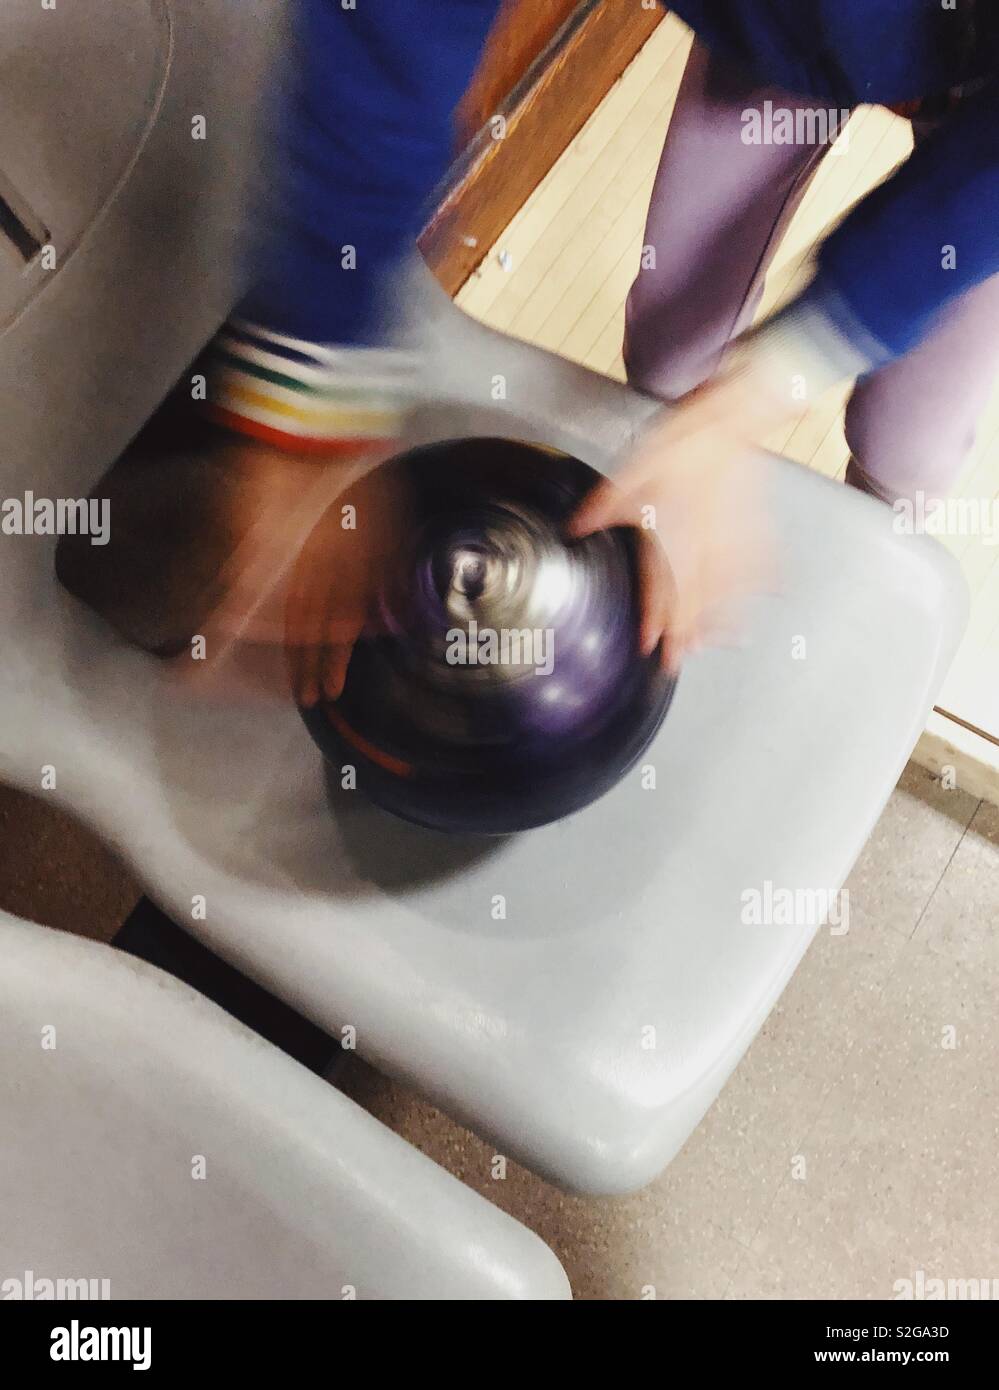 Young child spinning a bowling ball Stock Photo